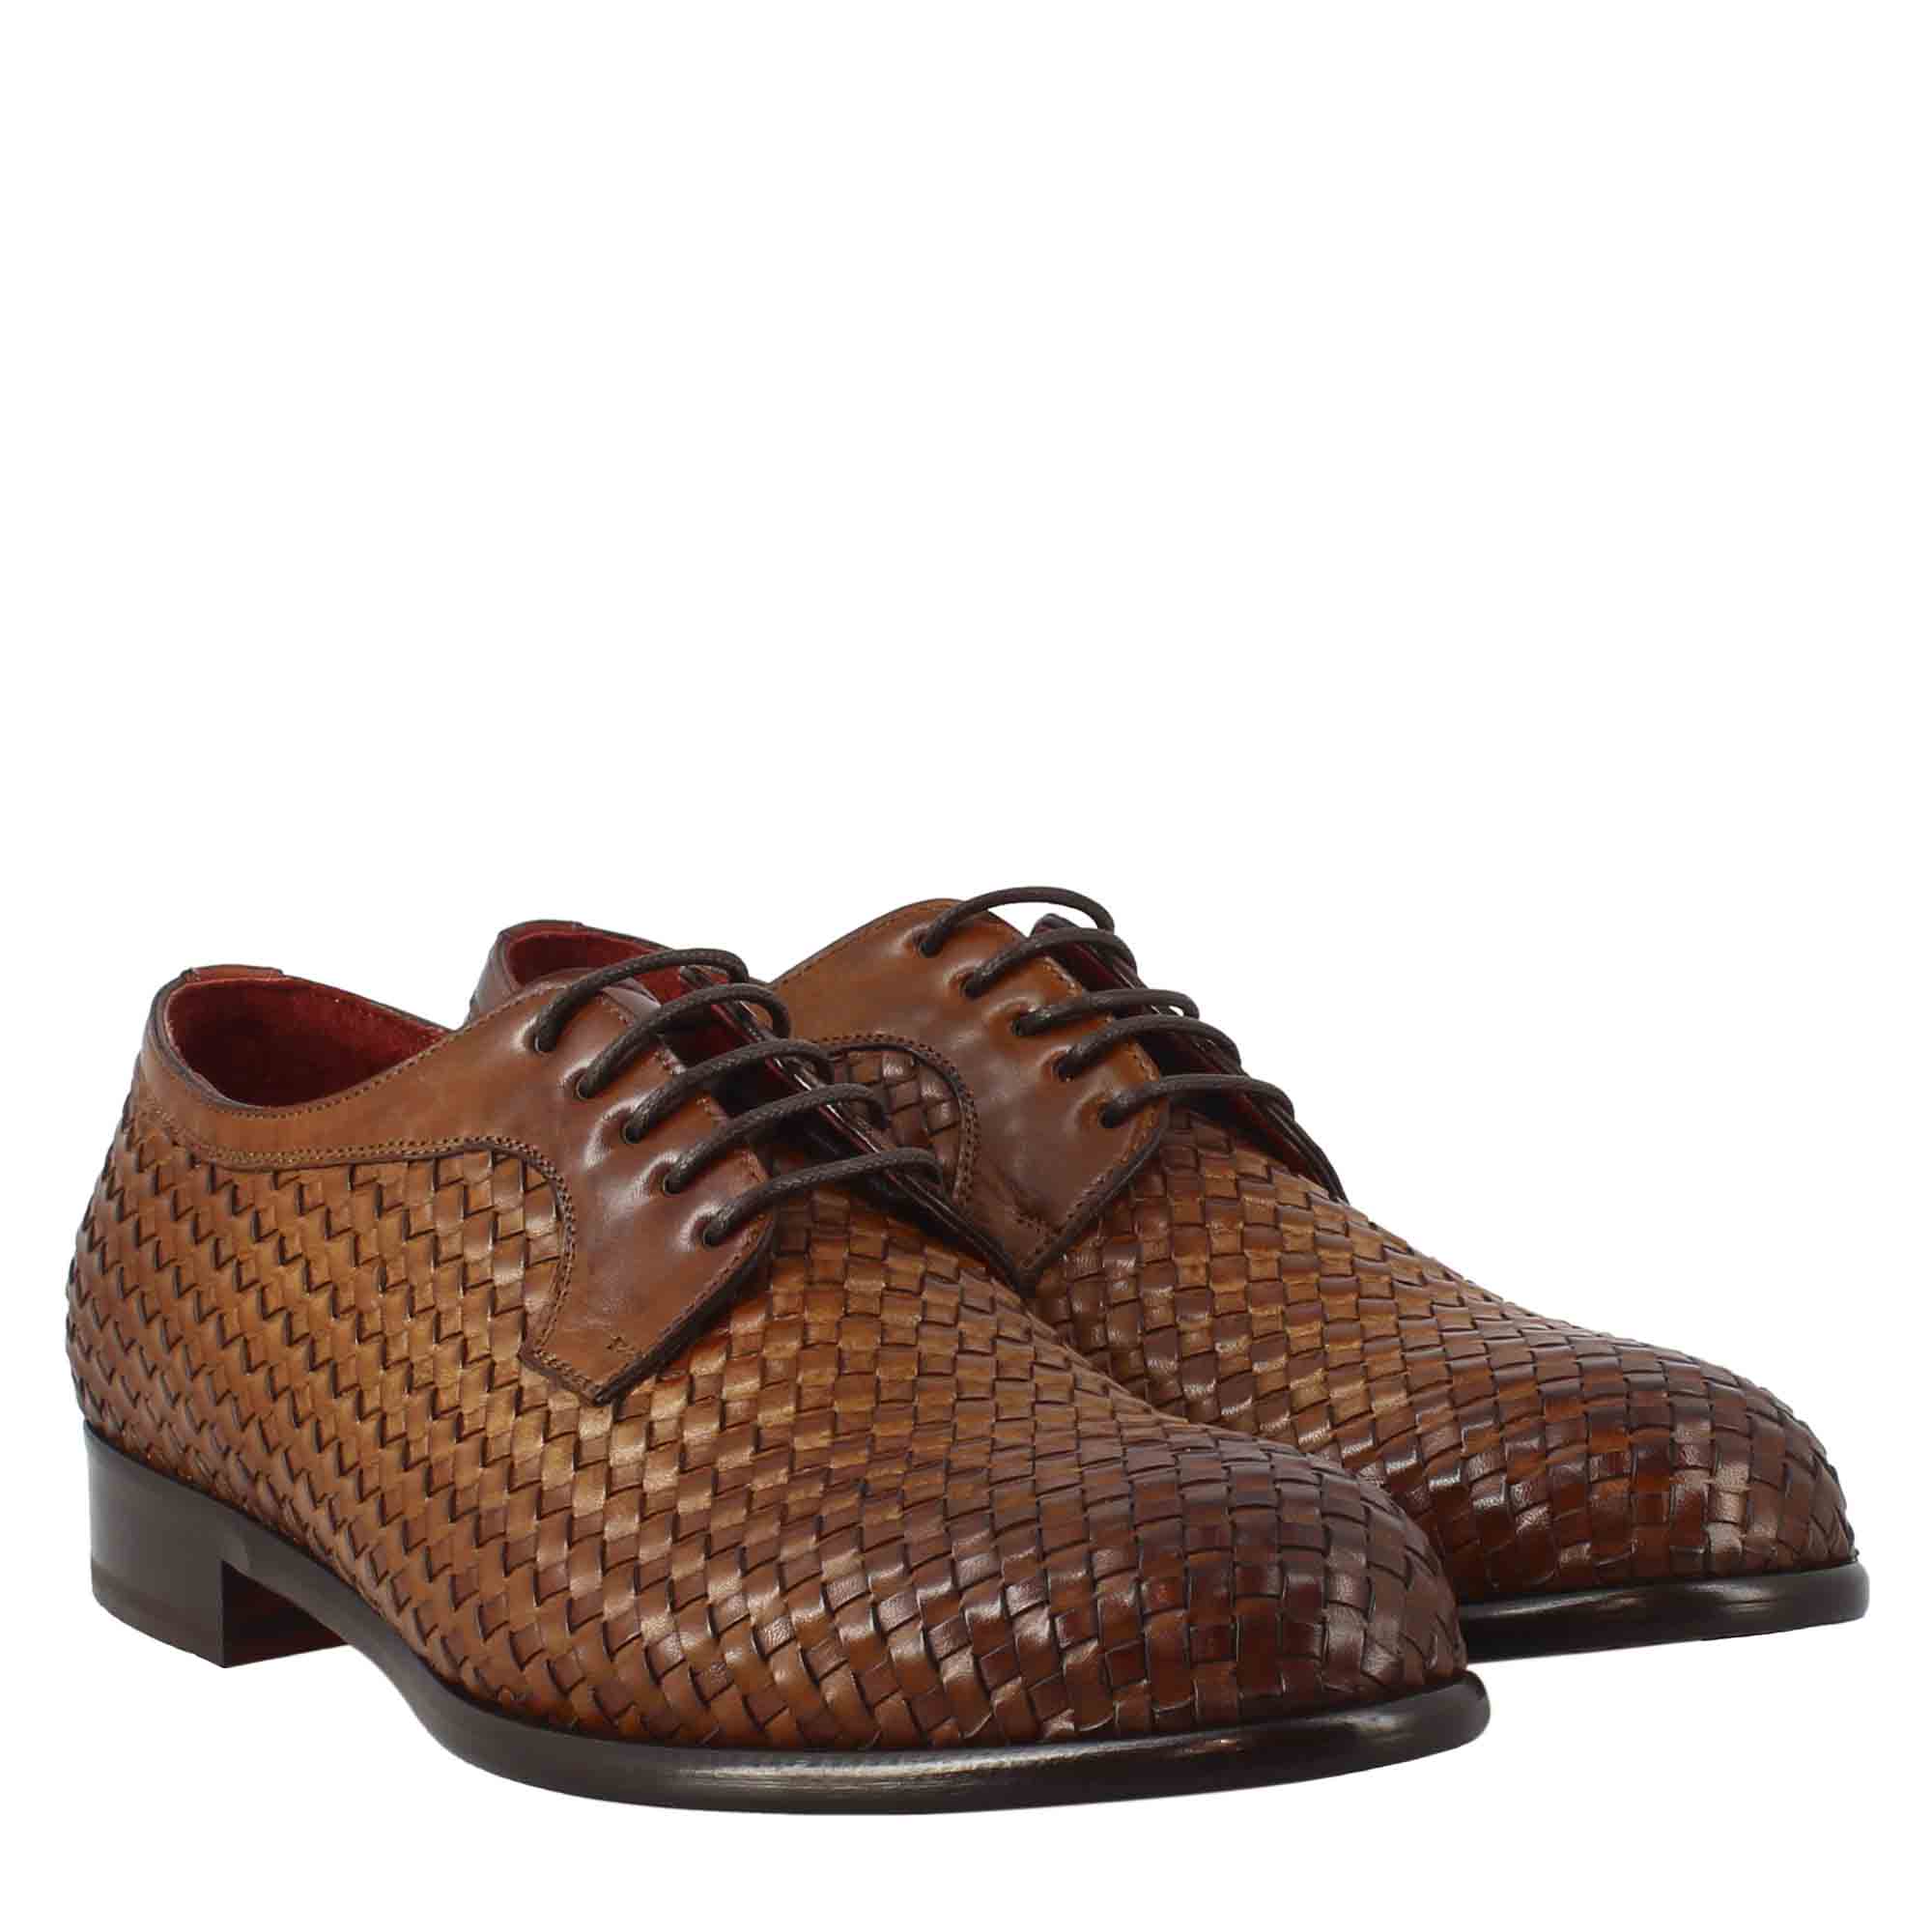 Brown Derby in Woven full grain leather